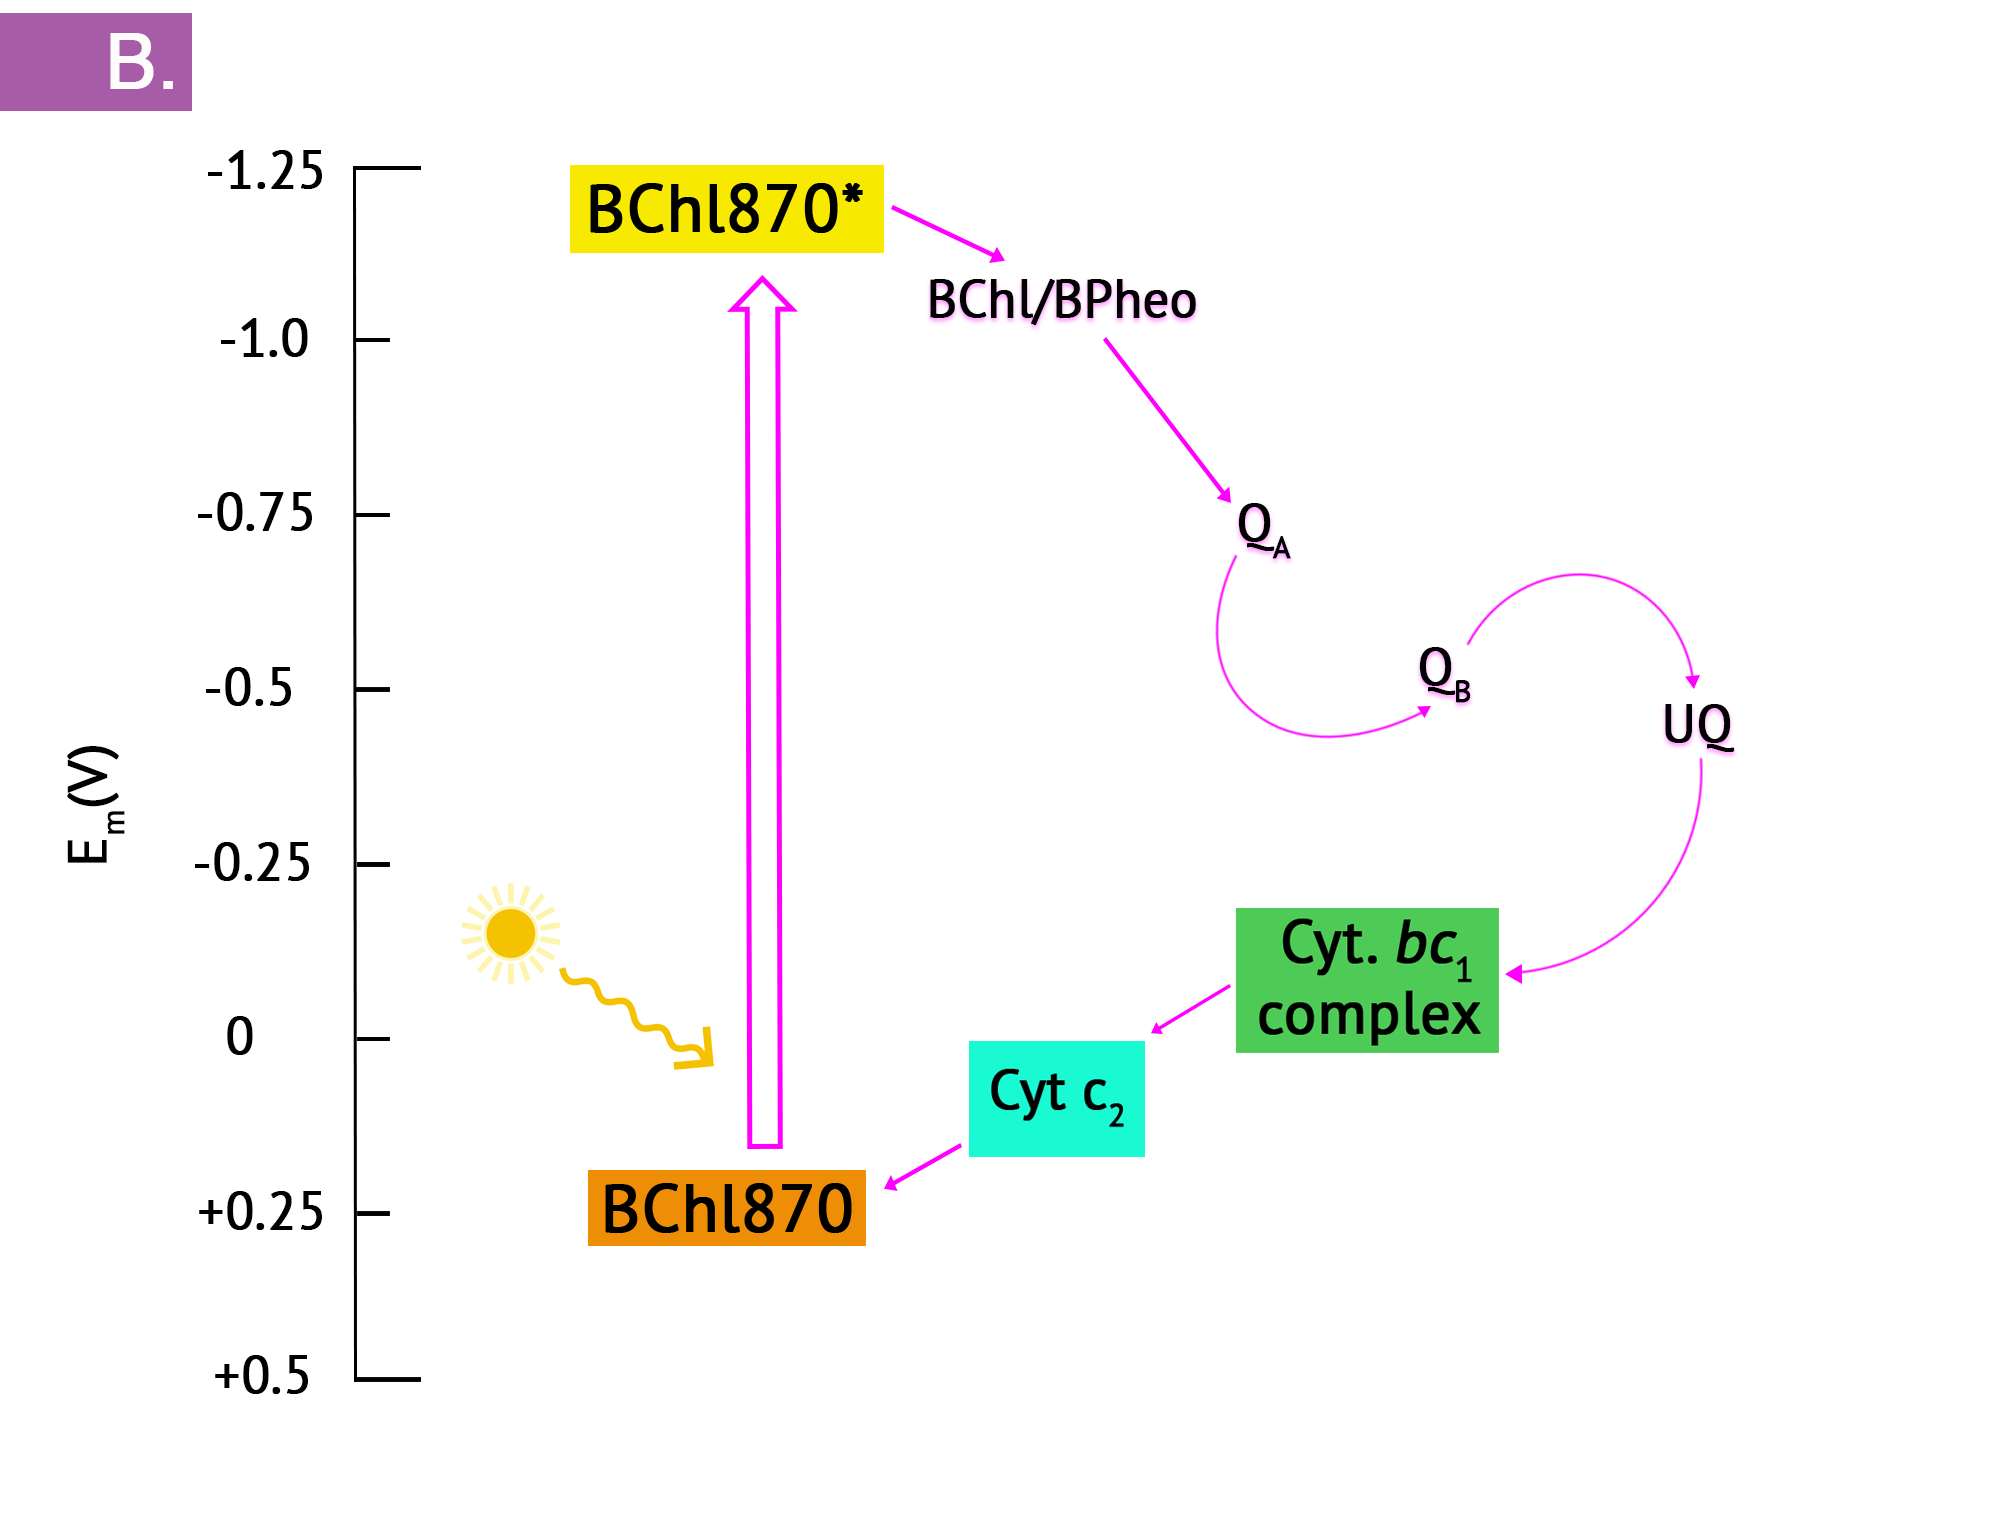 Panel B shows the sequence of changes in redox potential, beginning with photoexcitation of the reaction centre bacteriochlorophyll, leading to a strong reduction potential. Electrons enter the ETS, flowing in an exergonic direction until they cycle back to the reaction centre in cyclic photosynthesis.